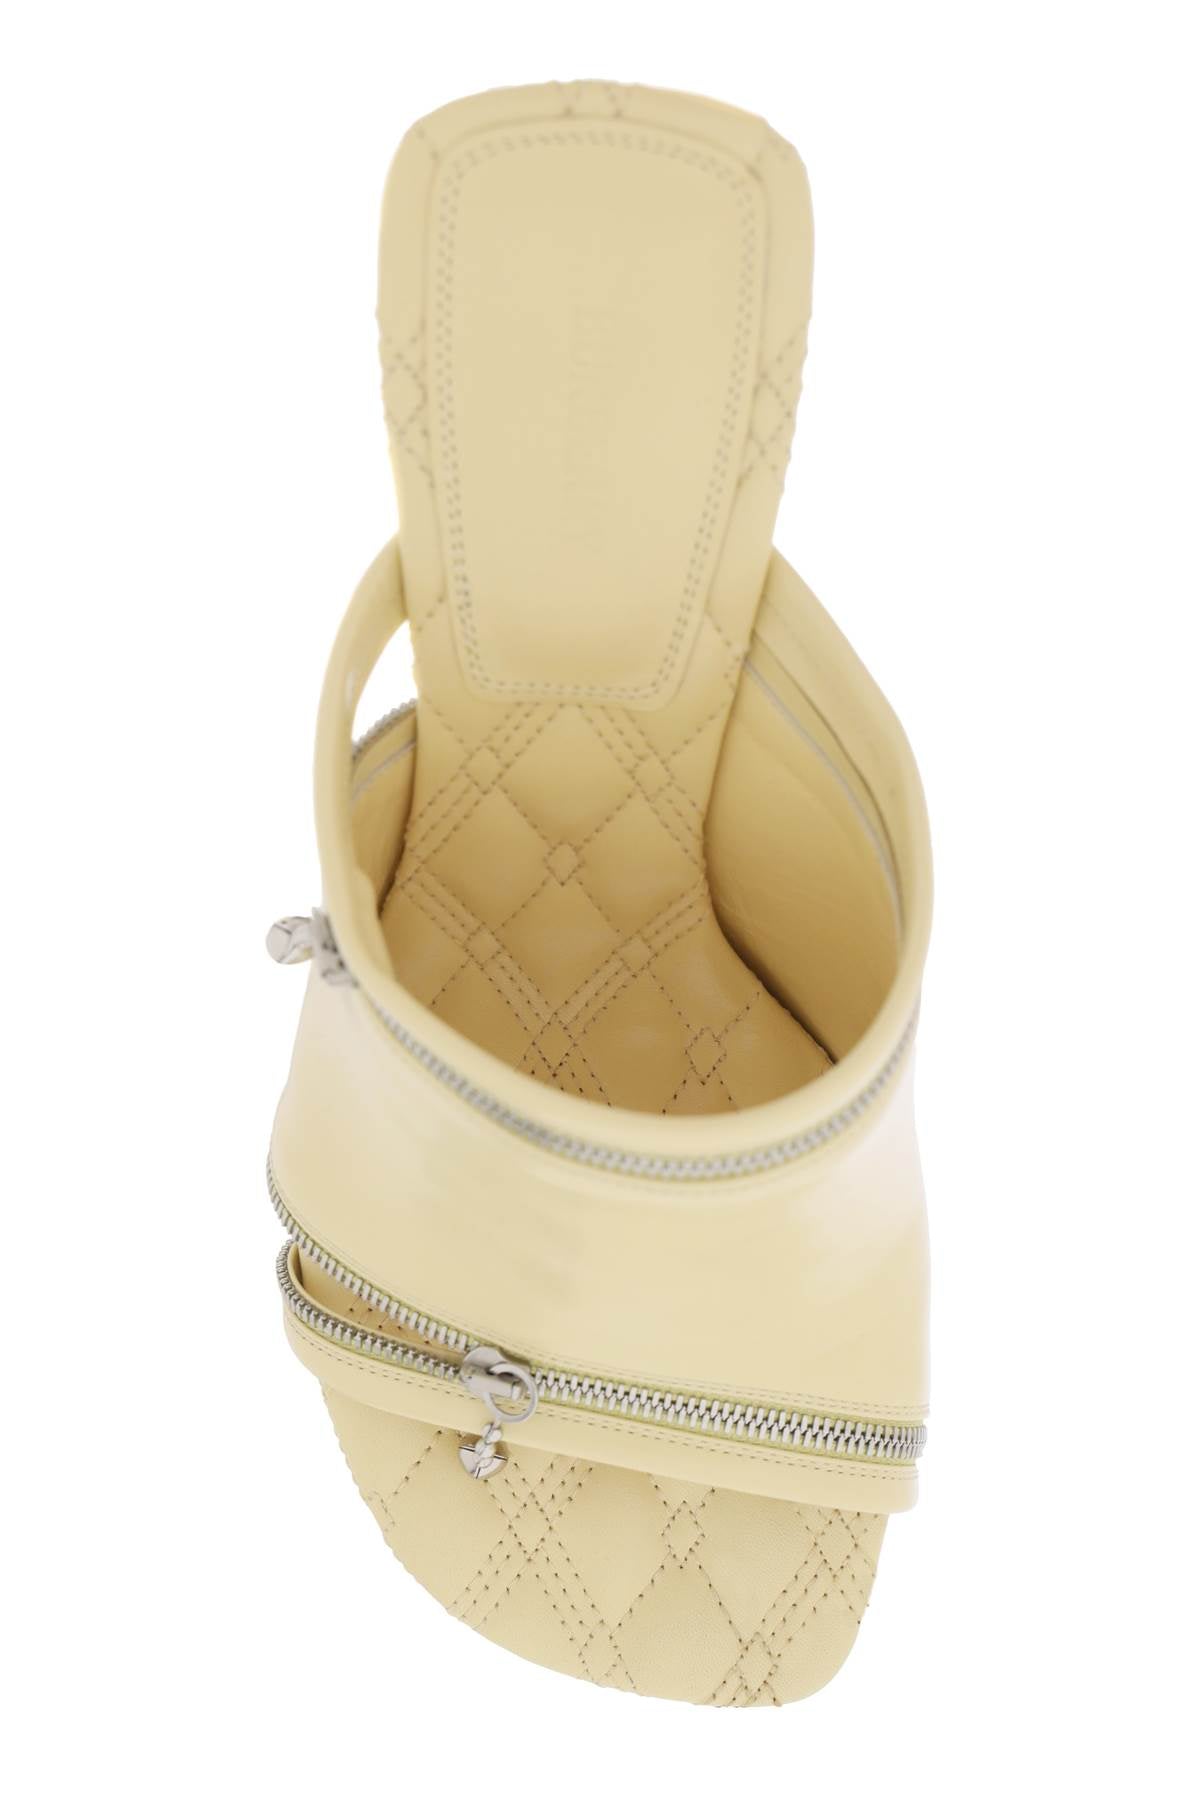 Yellow Peep Toe Sandals - Luxurious & Quilted Stiletto Pumps for Women